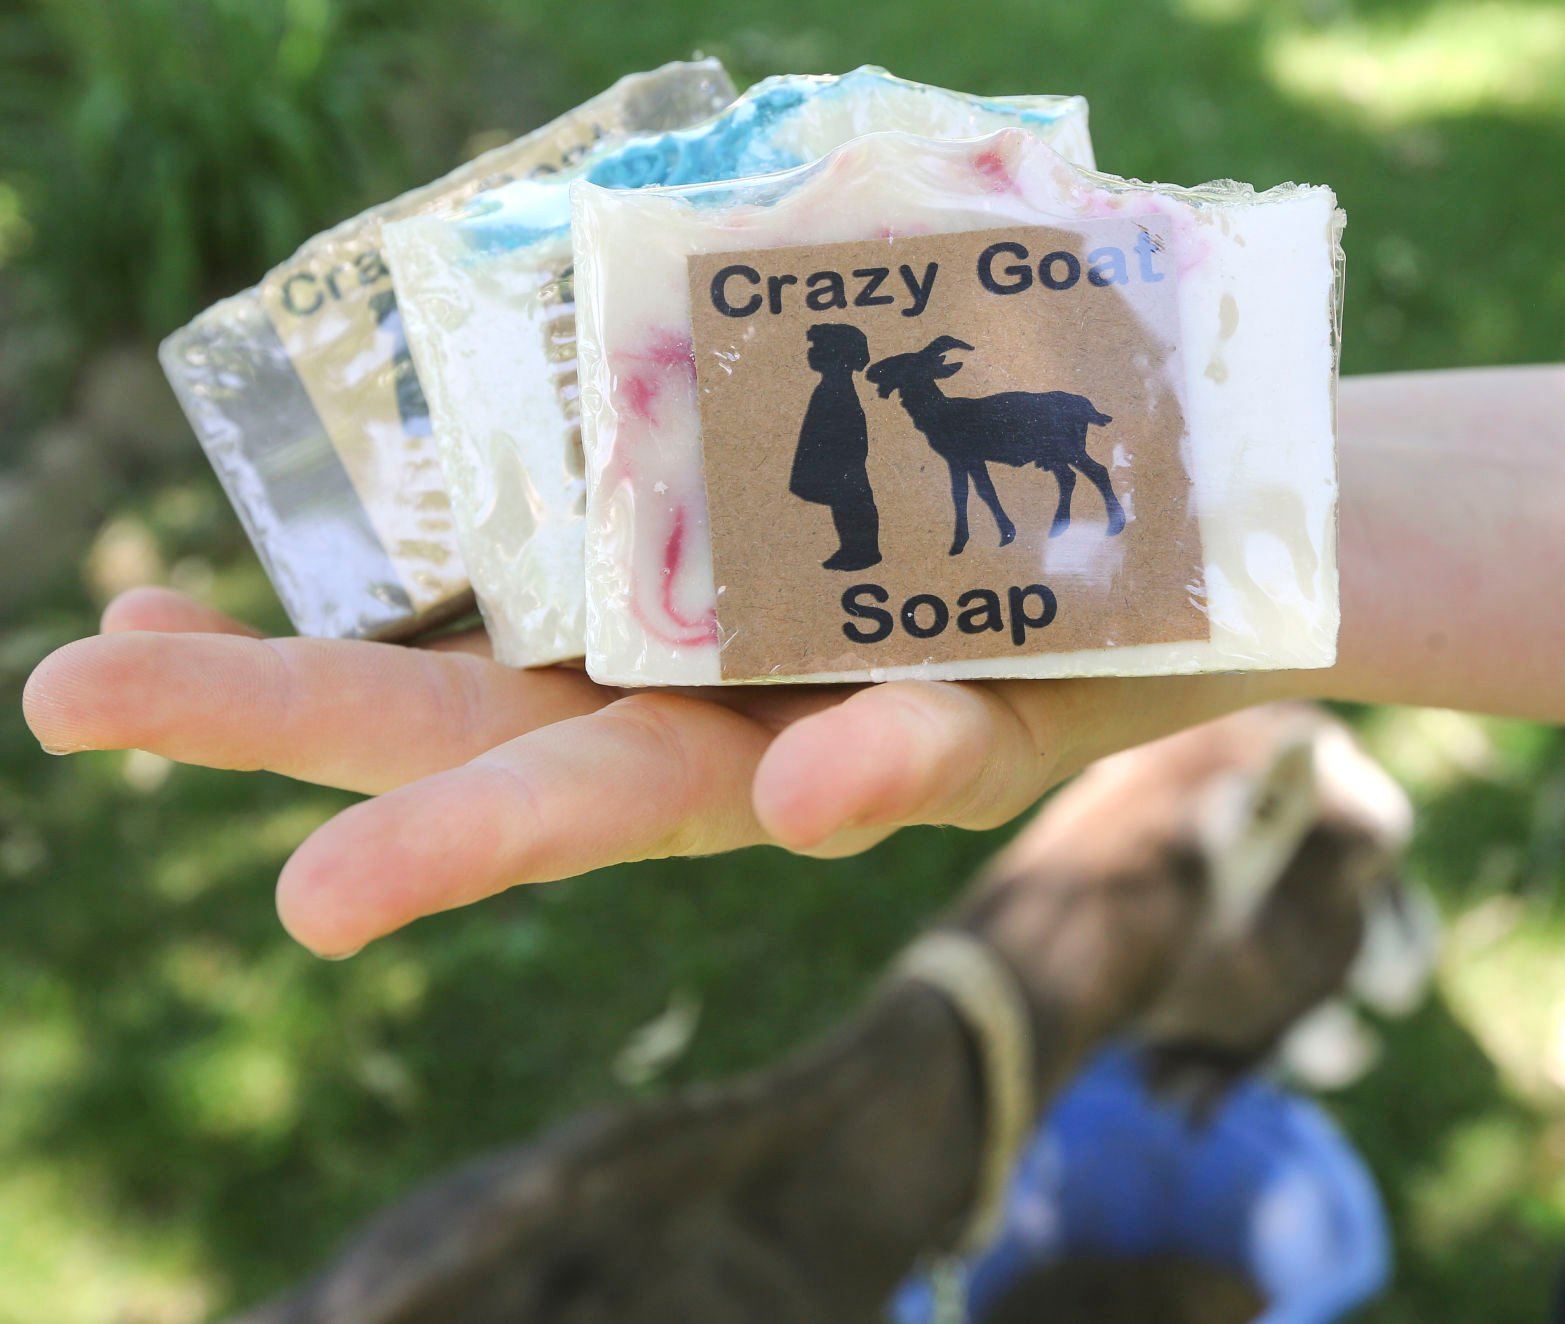 Crazy Goat Soap, made by Taylor Hilkin.    PHOTO CREDIT: Dave Kettering